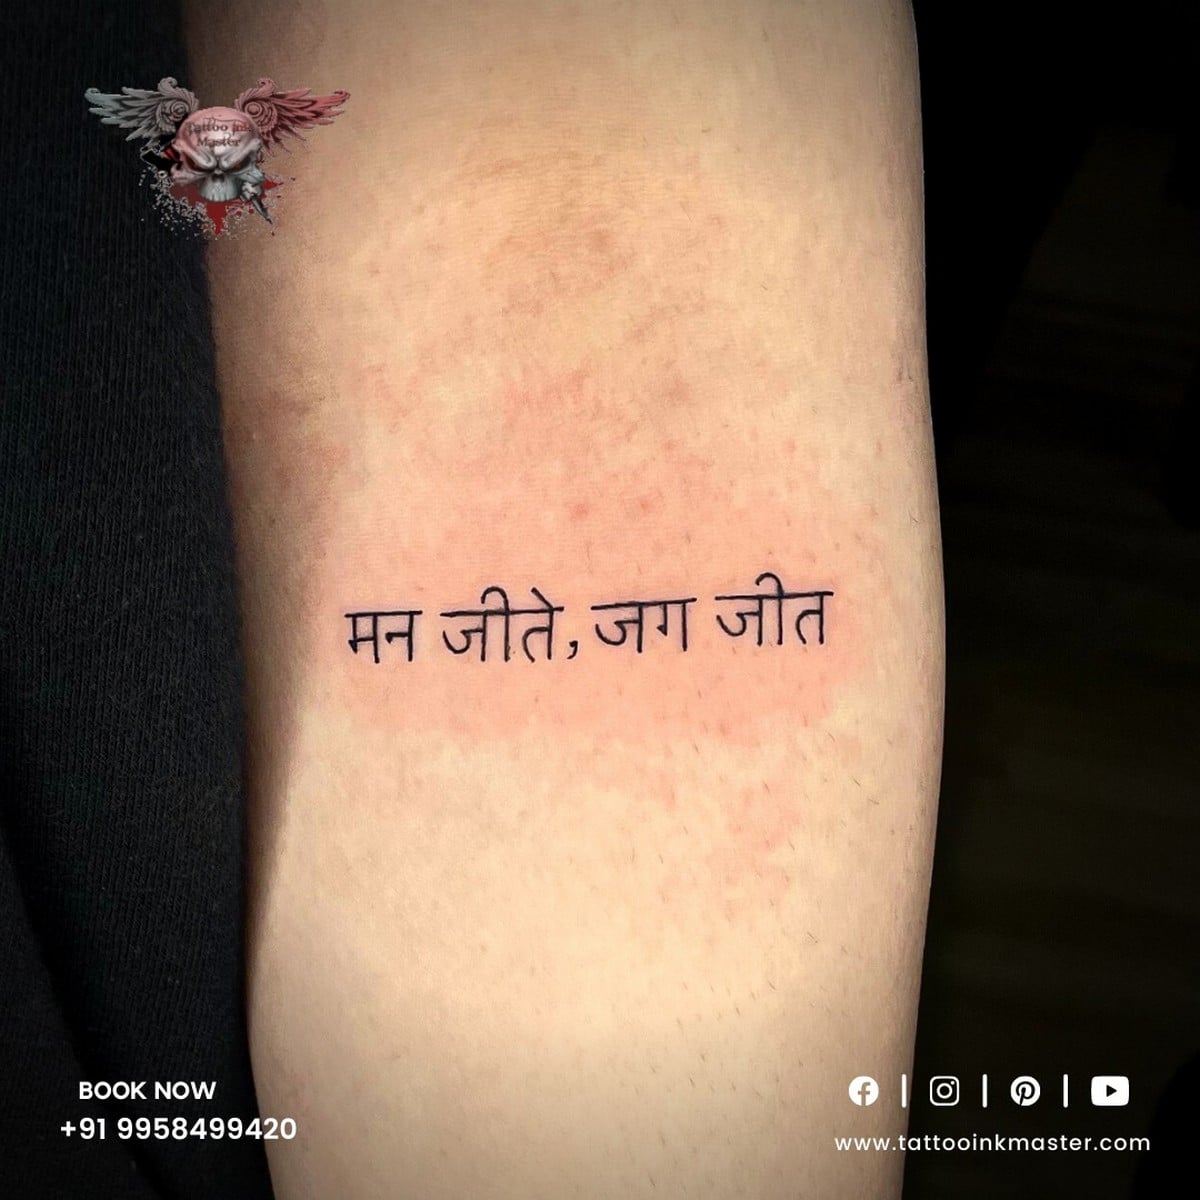 Inspired By Katy Perry's Sanskrit Tattoo? Know What it Means - News18